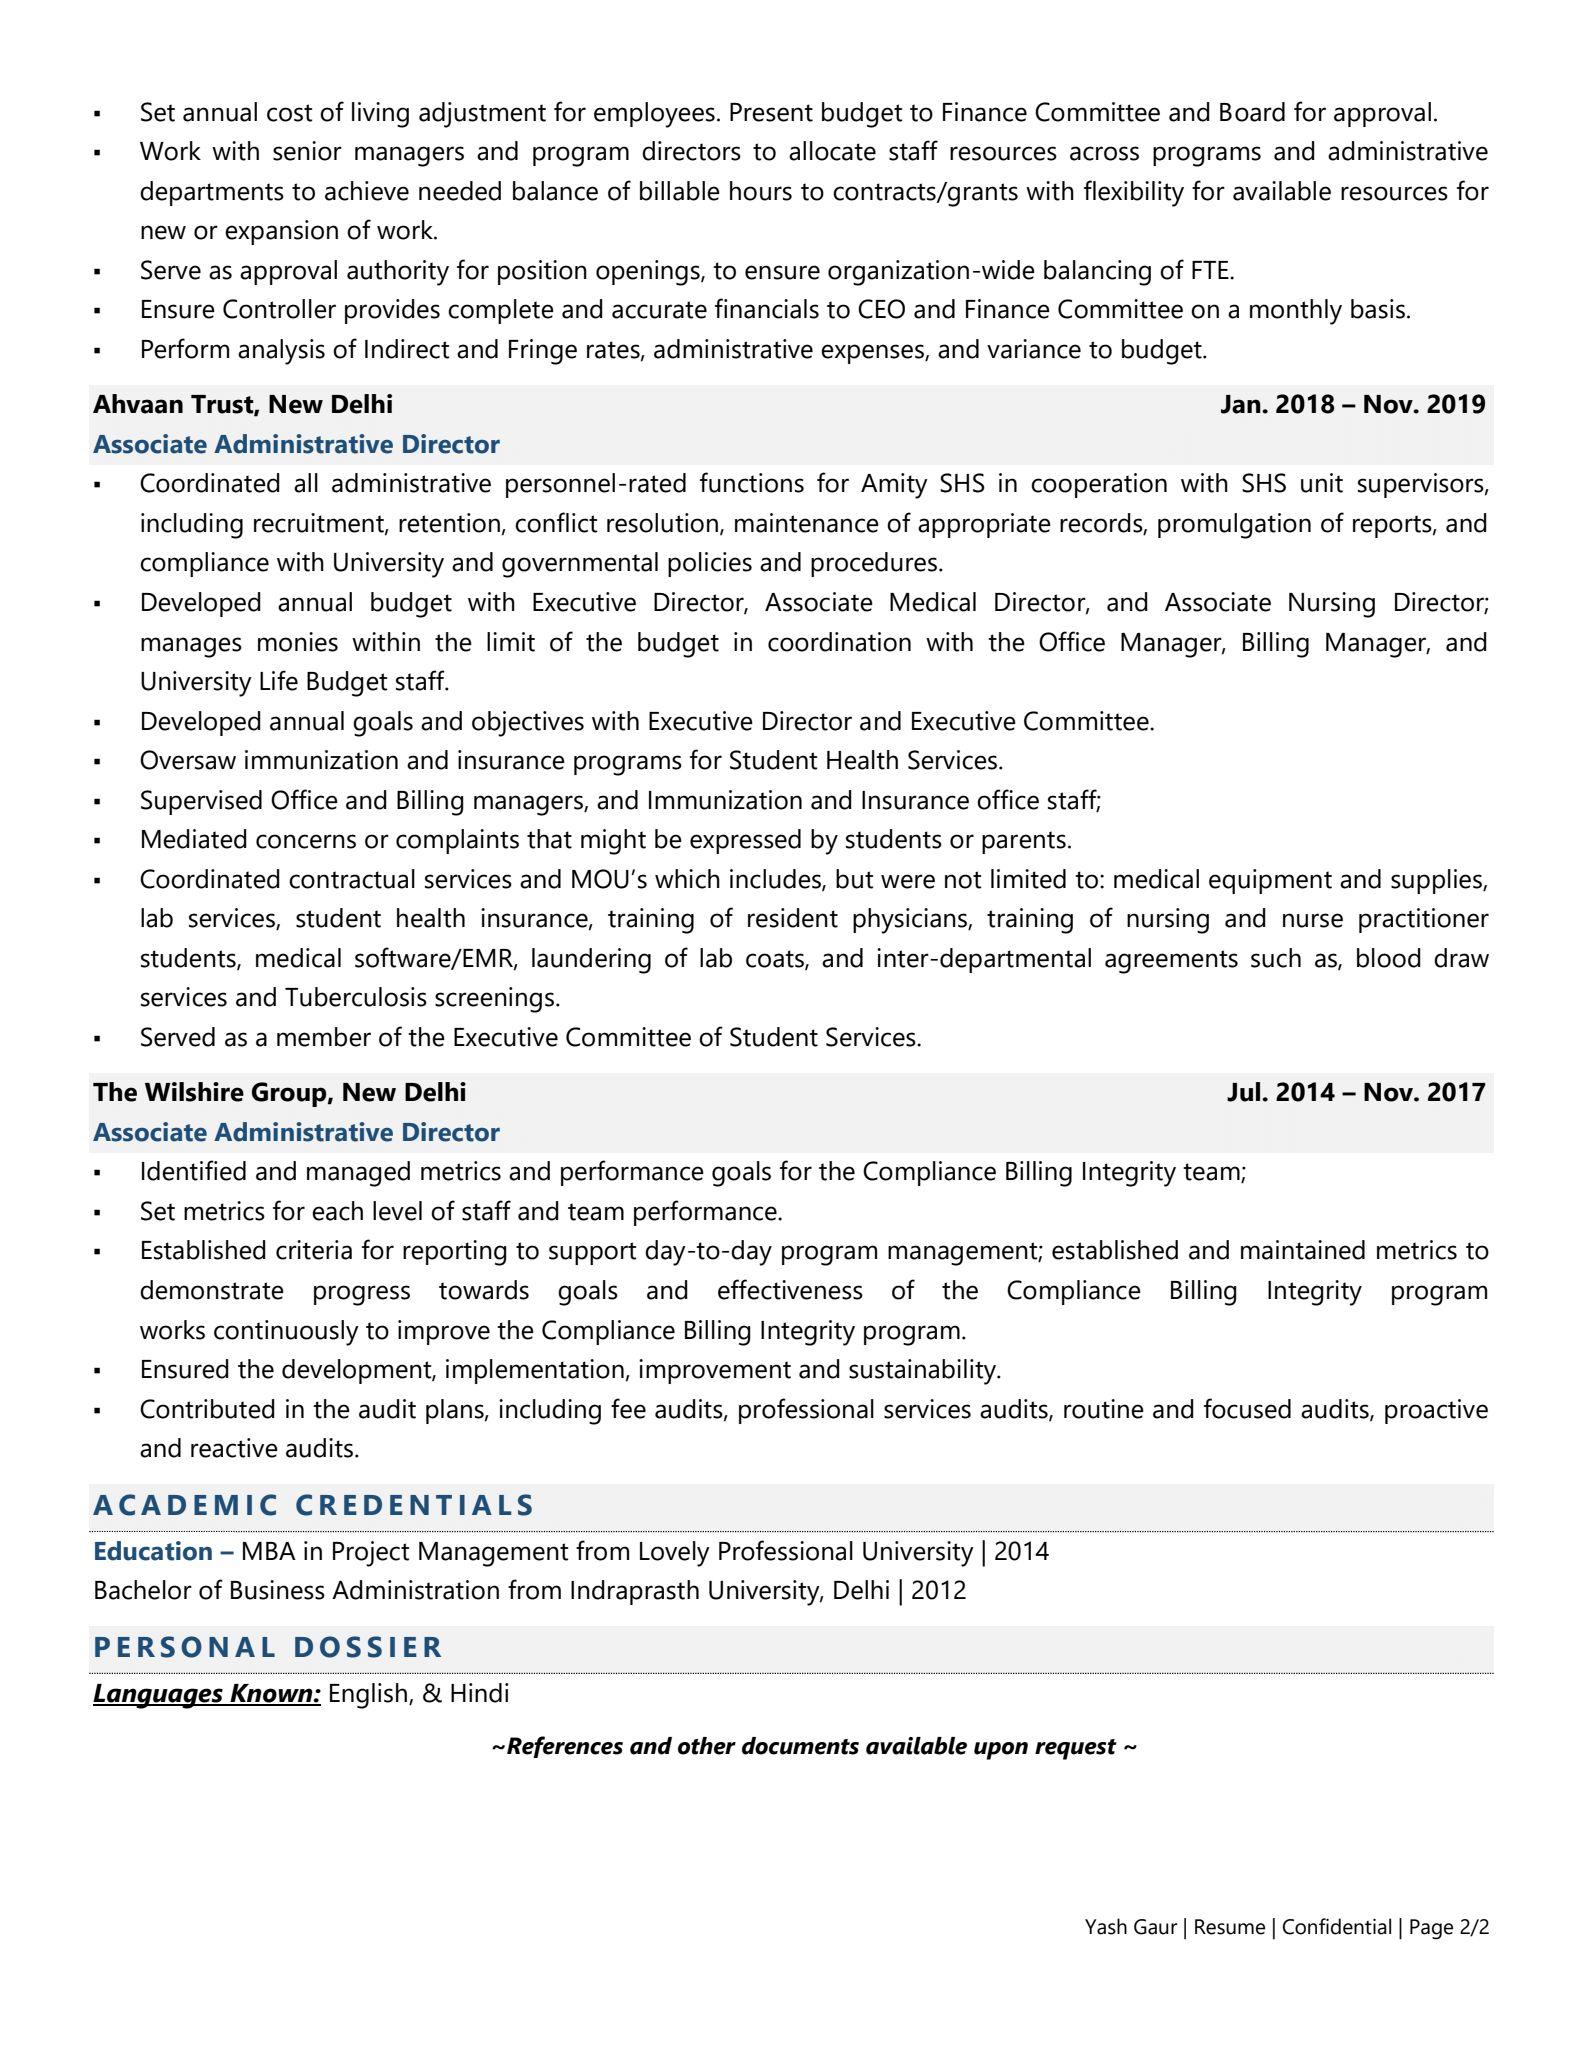 Administrative Director - Resume Example & Template